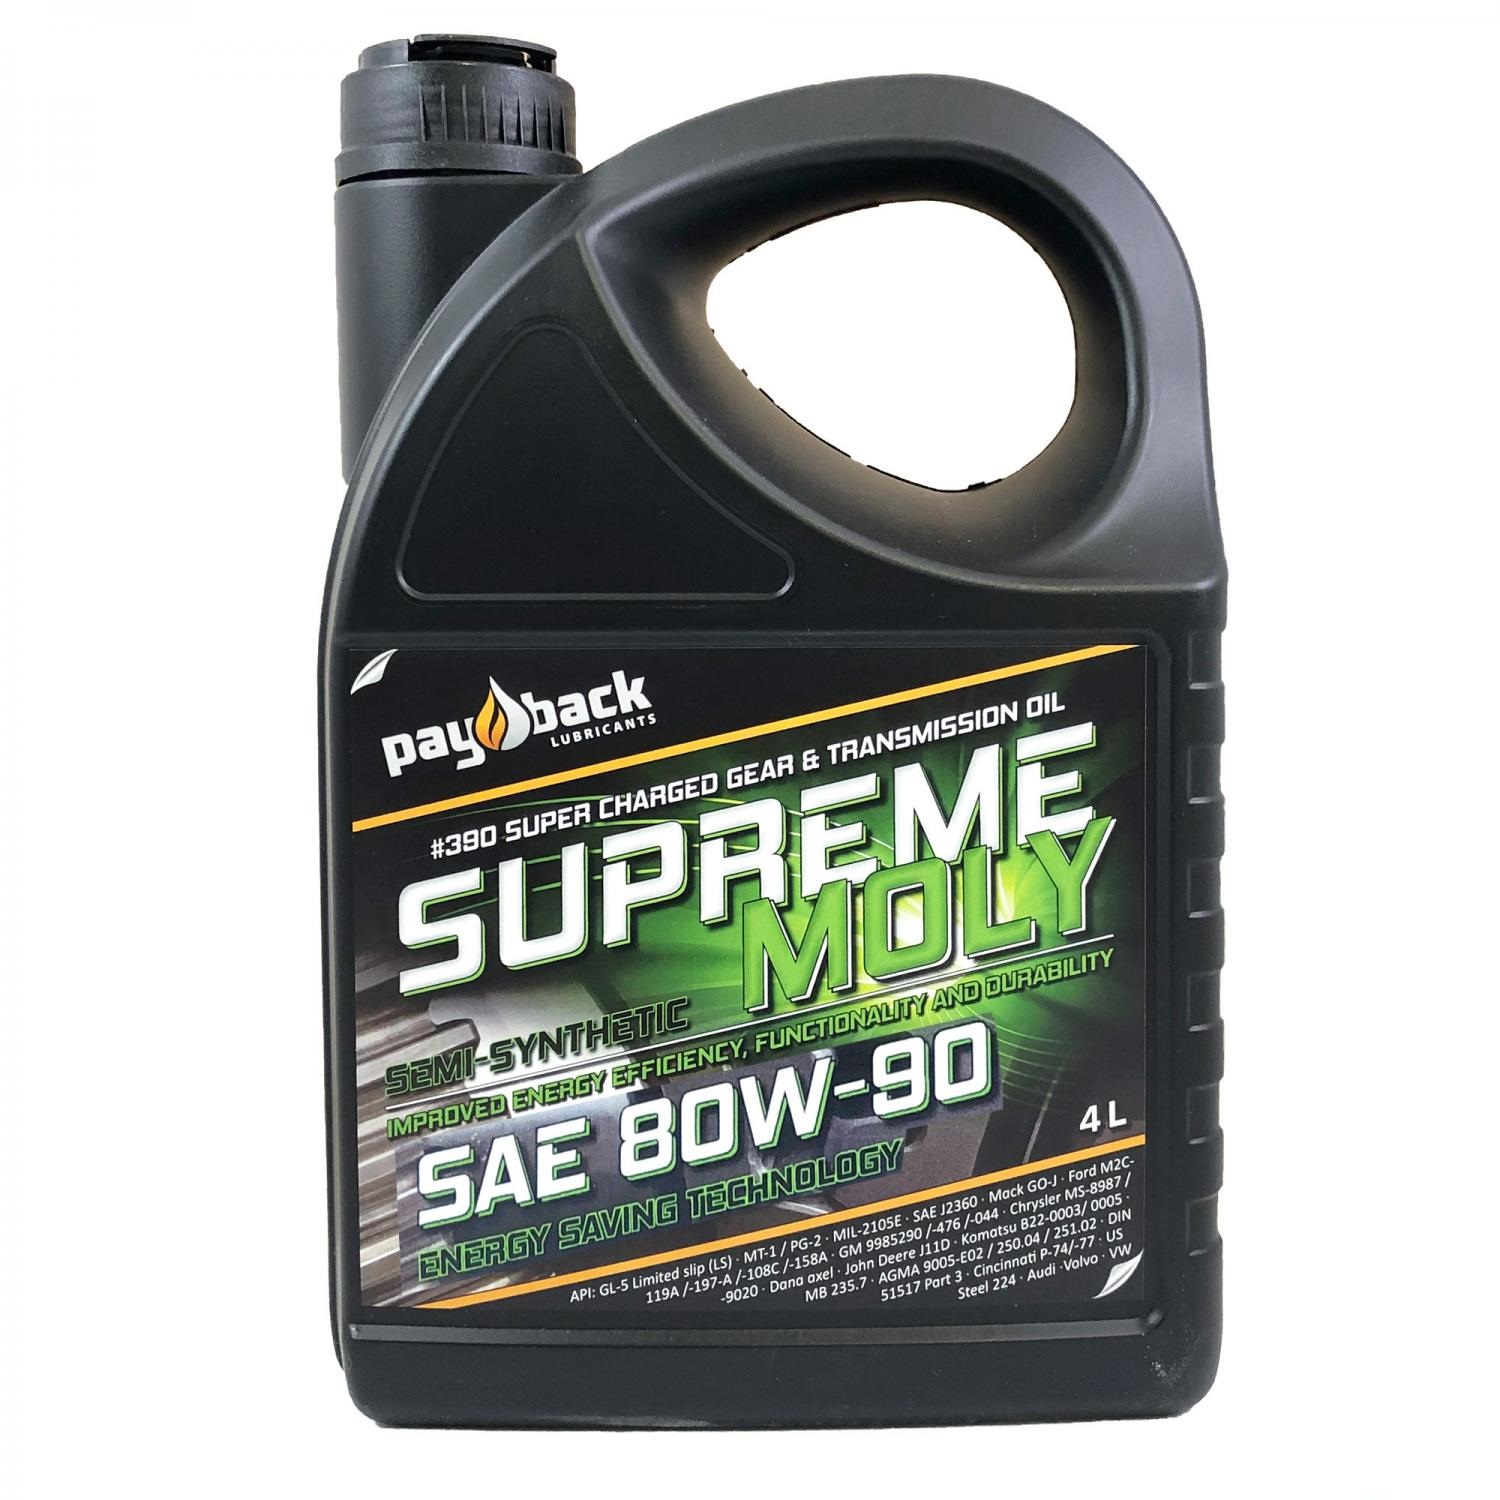  #390 G SUPREME MOLY SYNTHETIC API GL-5 LS  (SAE 80W-90) 1L (Finns även i 4 L)